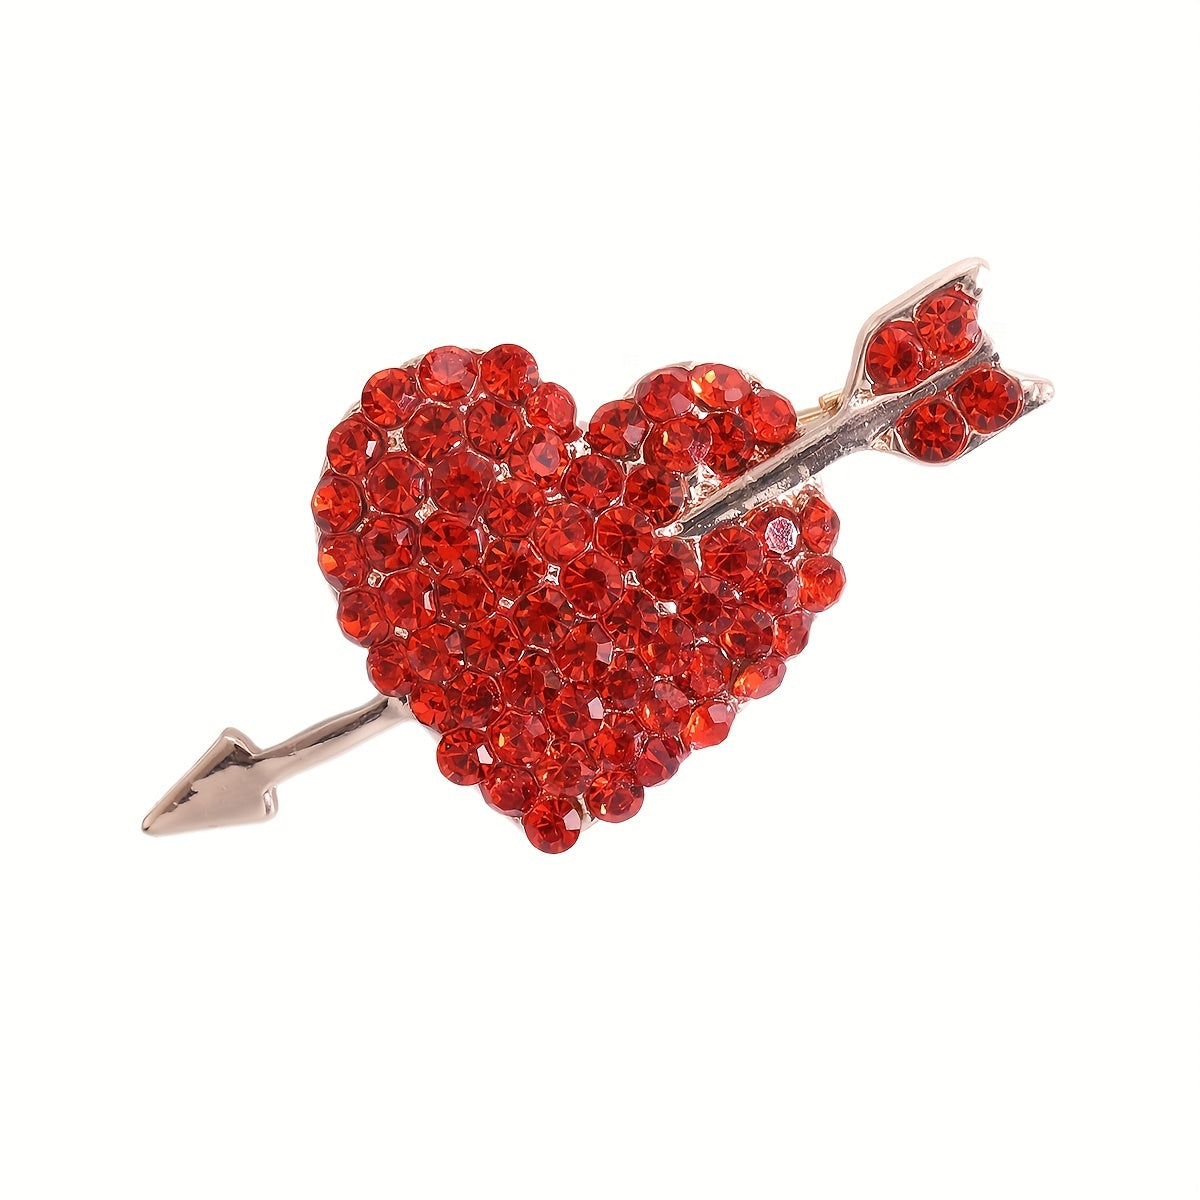 Creative Love Heart Brooch Pin - Shiny Faux Crystal Cardigan Buckle Accessories